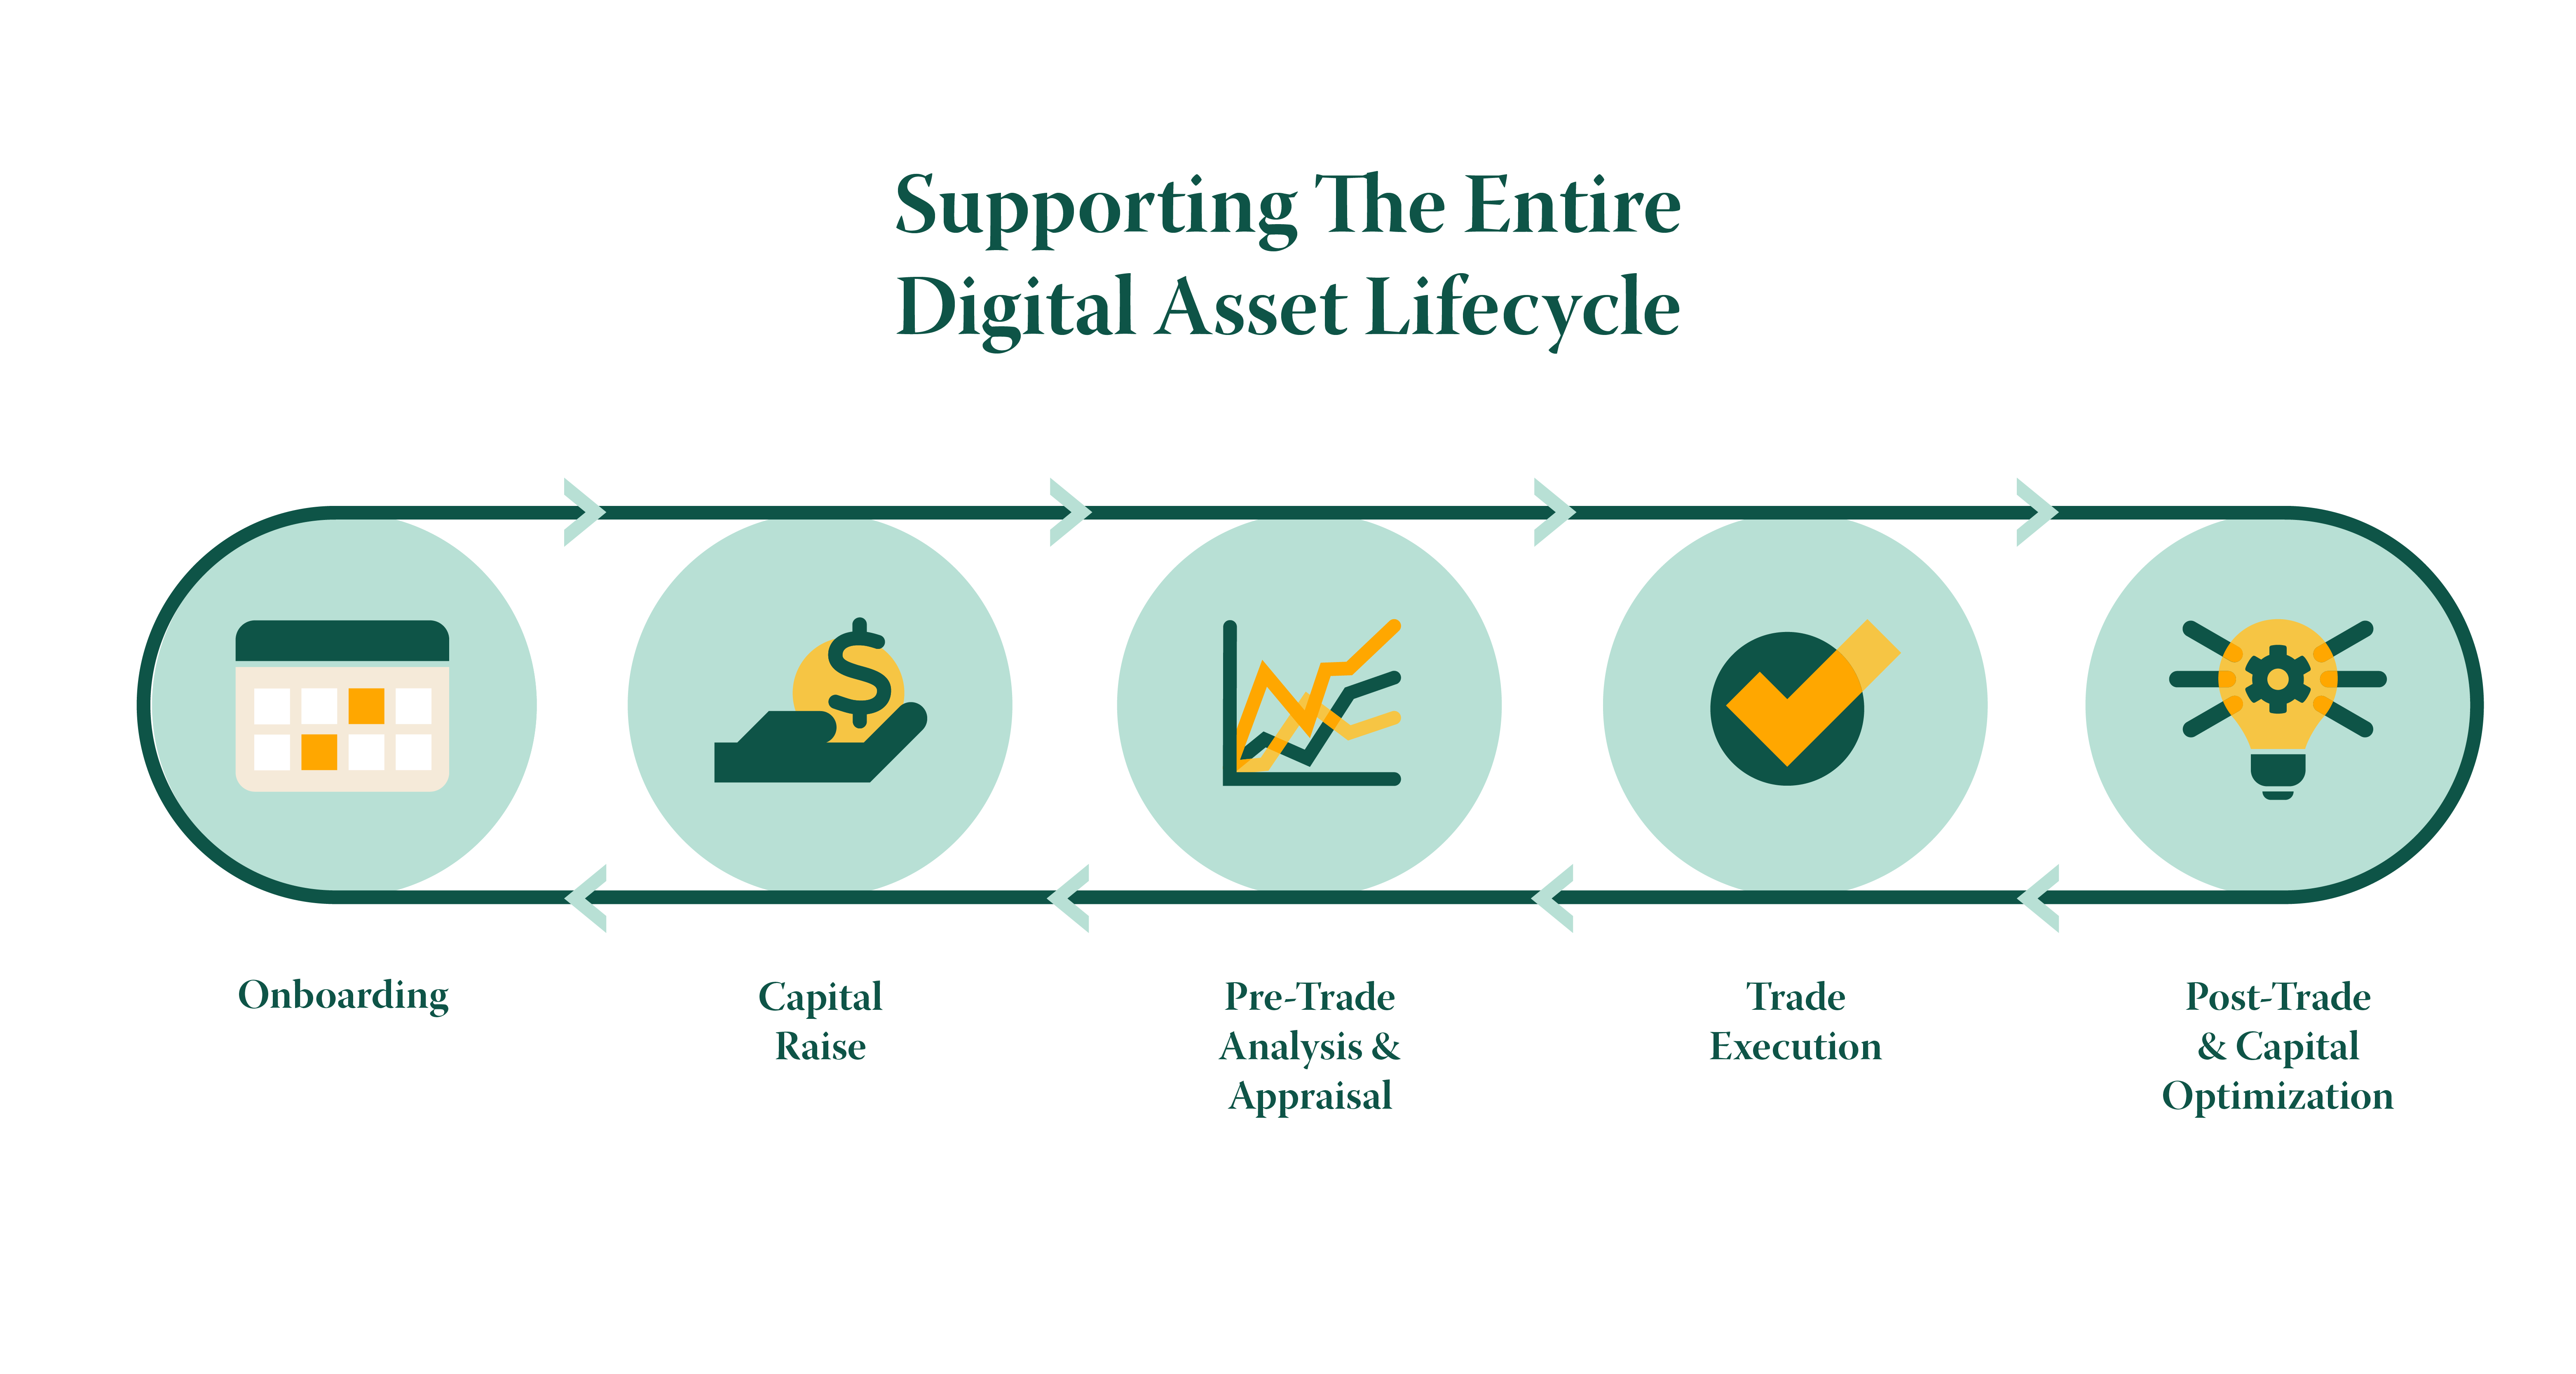 Digital Asset Lifecycle: Onboarding, Capital Rise, Pre-Trade Analysis and Appraisal, Trade Execution and Post-Trade and Capital Optimization